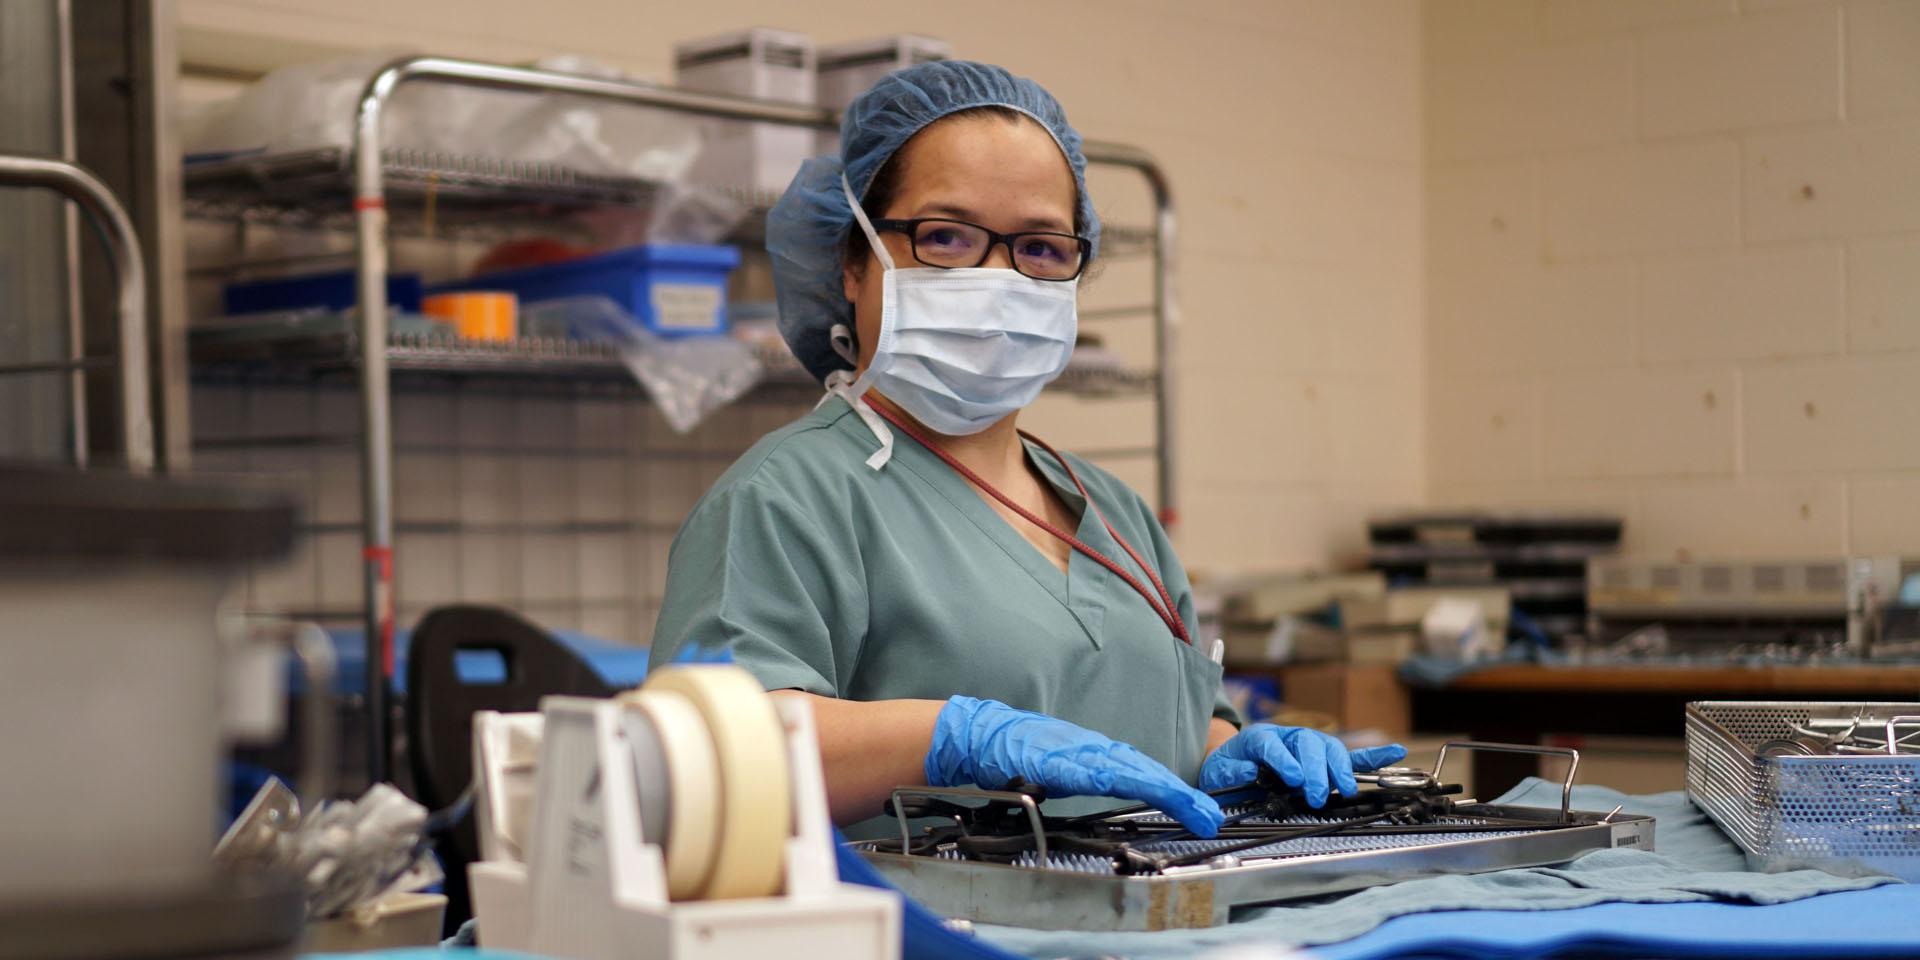 Adela wearing PPE touching a tray of instruments